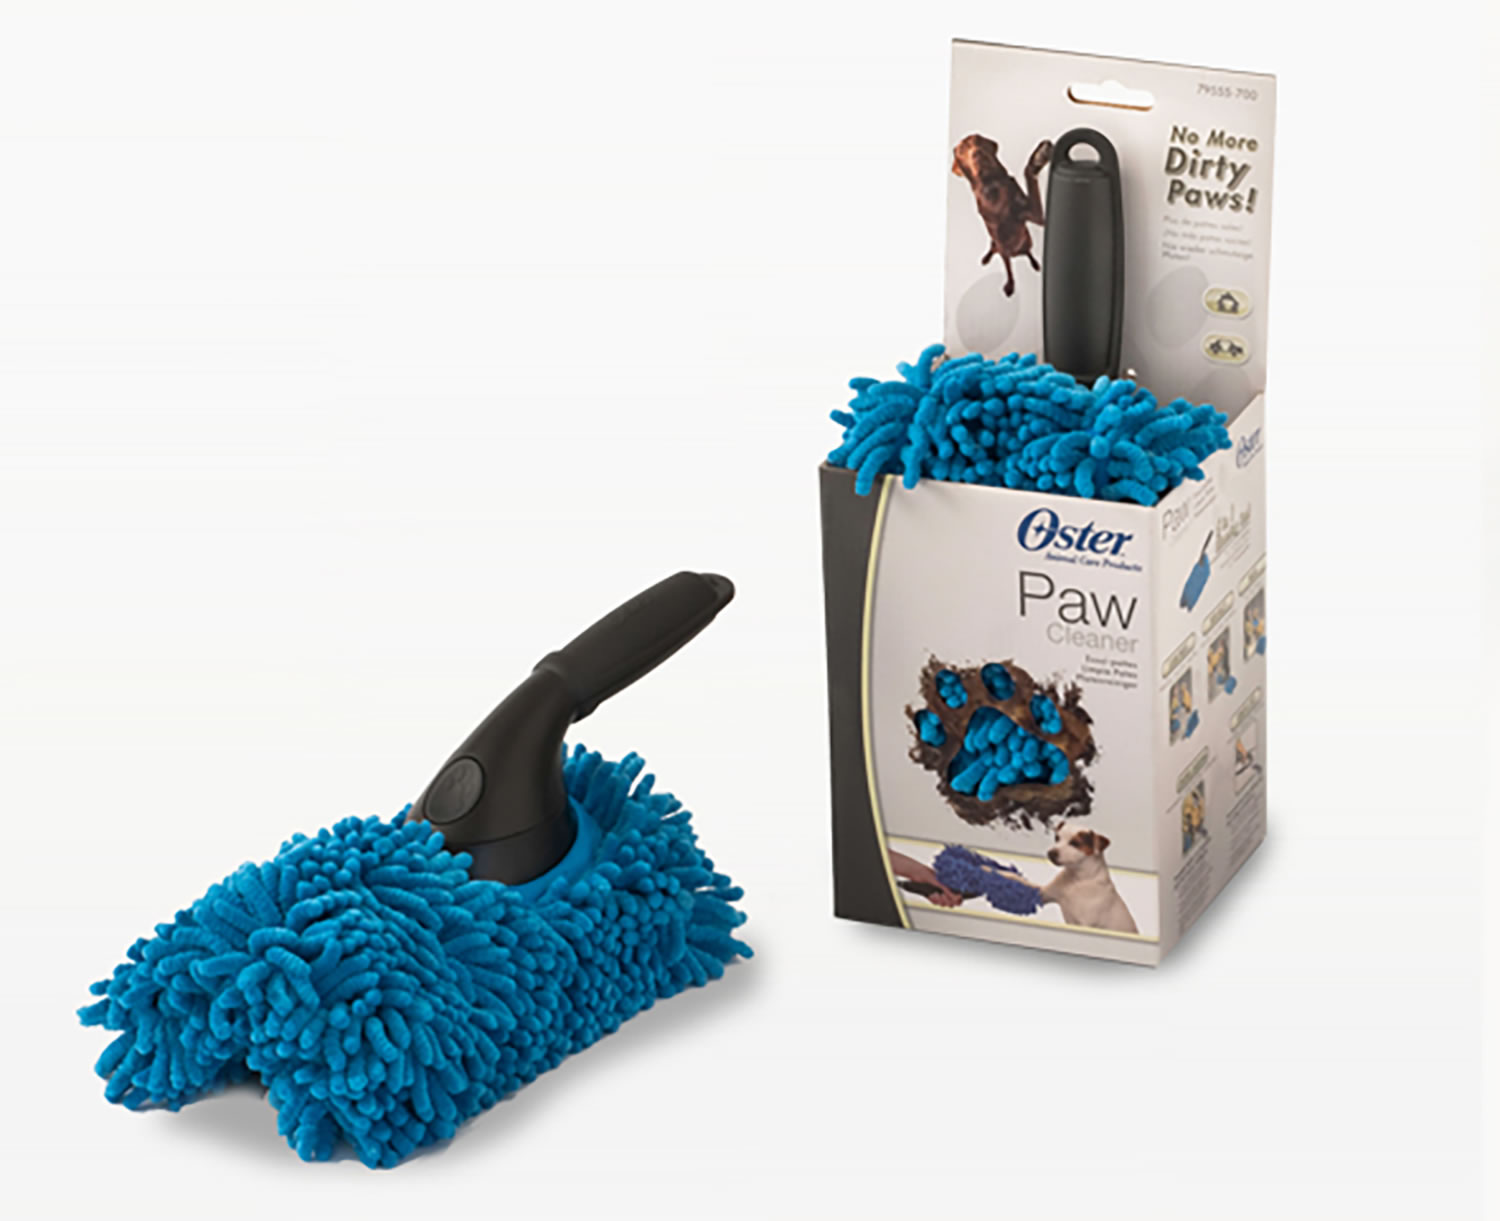 OSTER PAW CLEANER